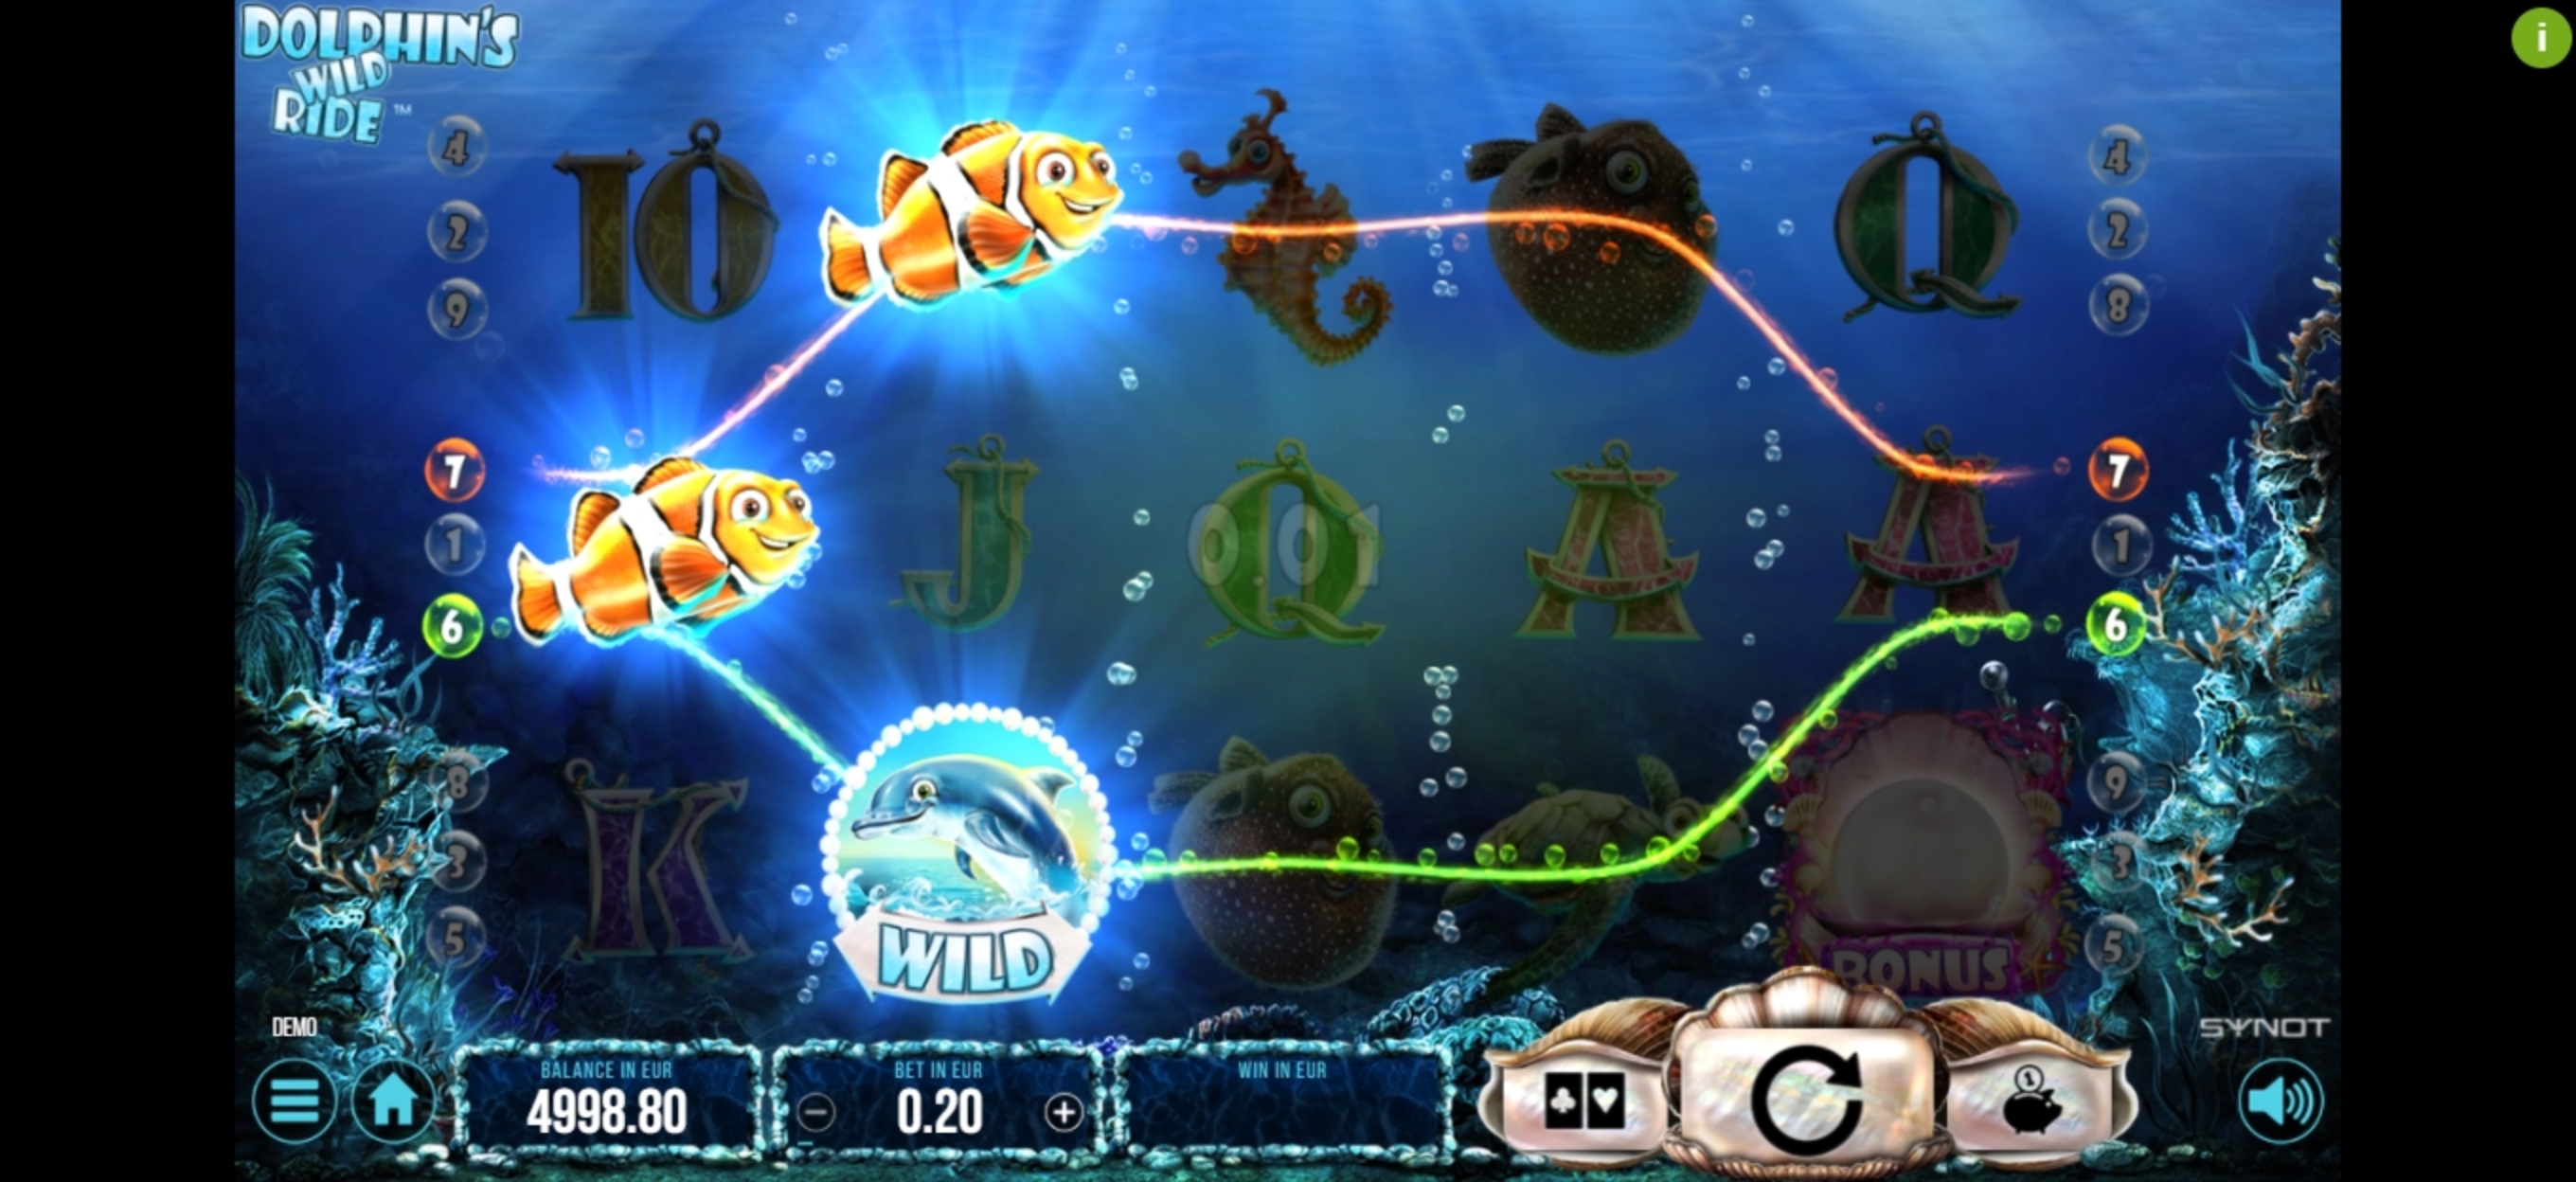 Win Money in Dolphin's Wild Ride Free Slot Game by Synot Games